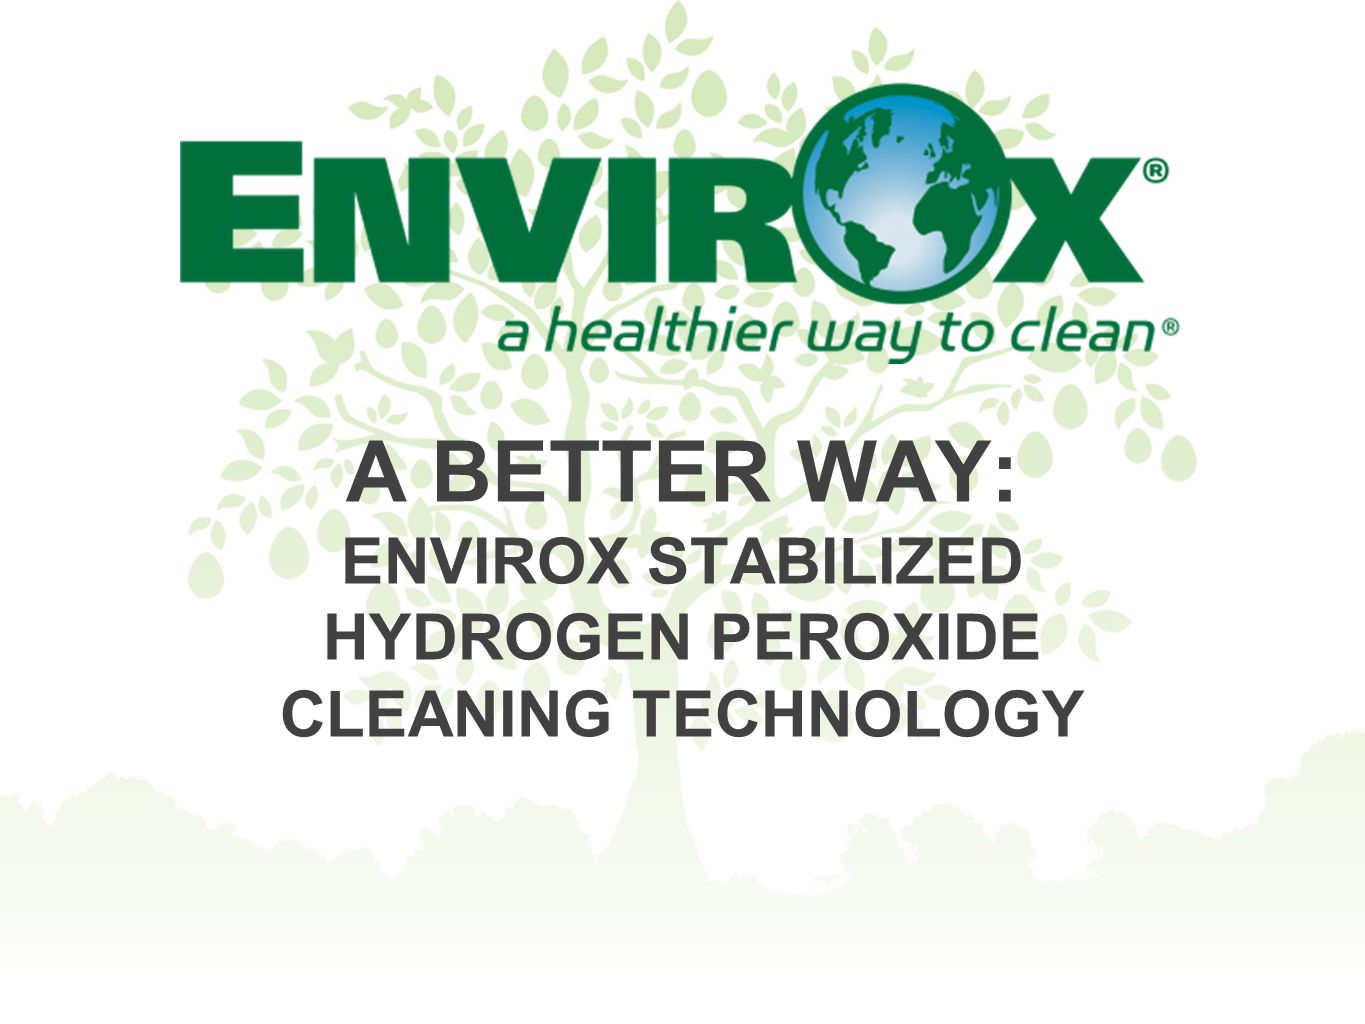 A BETTER WAY: ENVIROX STABILIZED HYDROGEN PEROXIDE CLEANING TECHNOLOGY